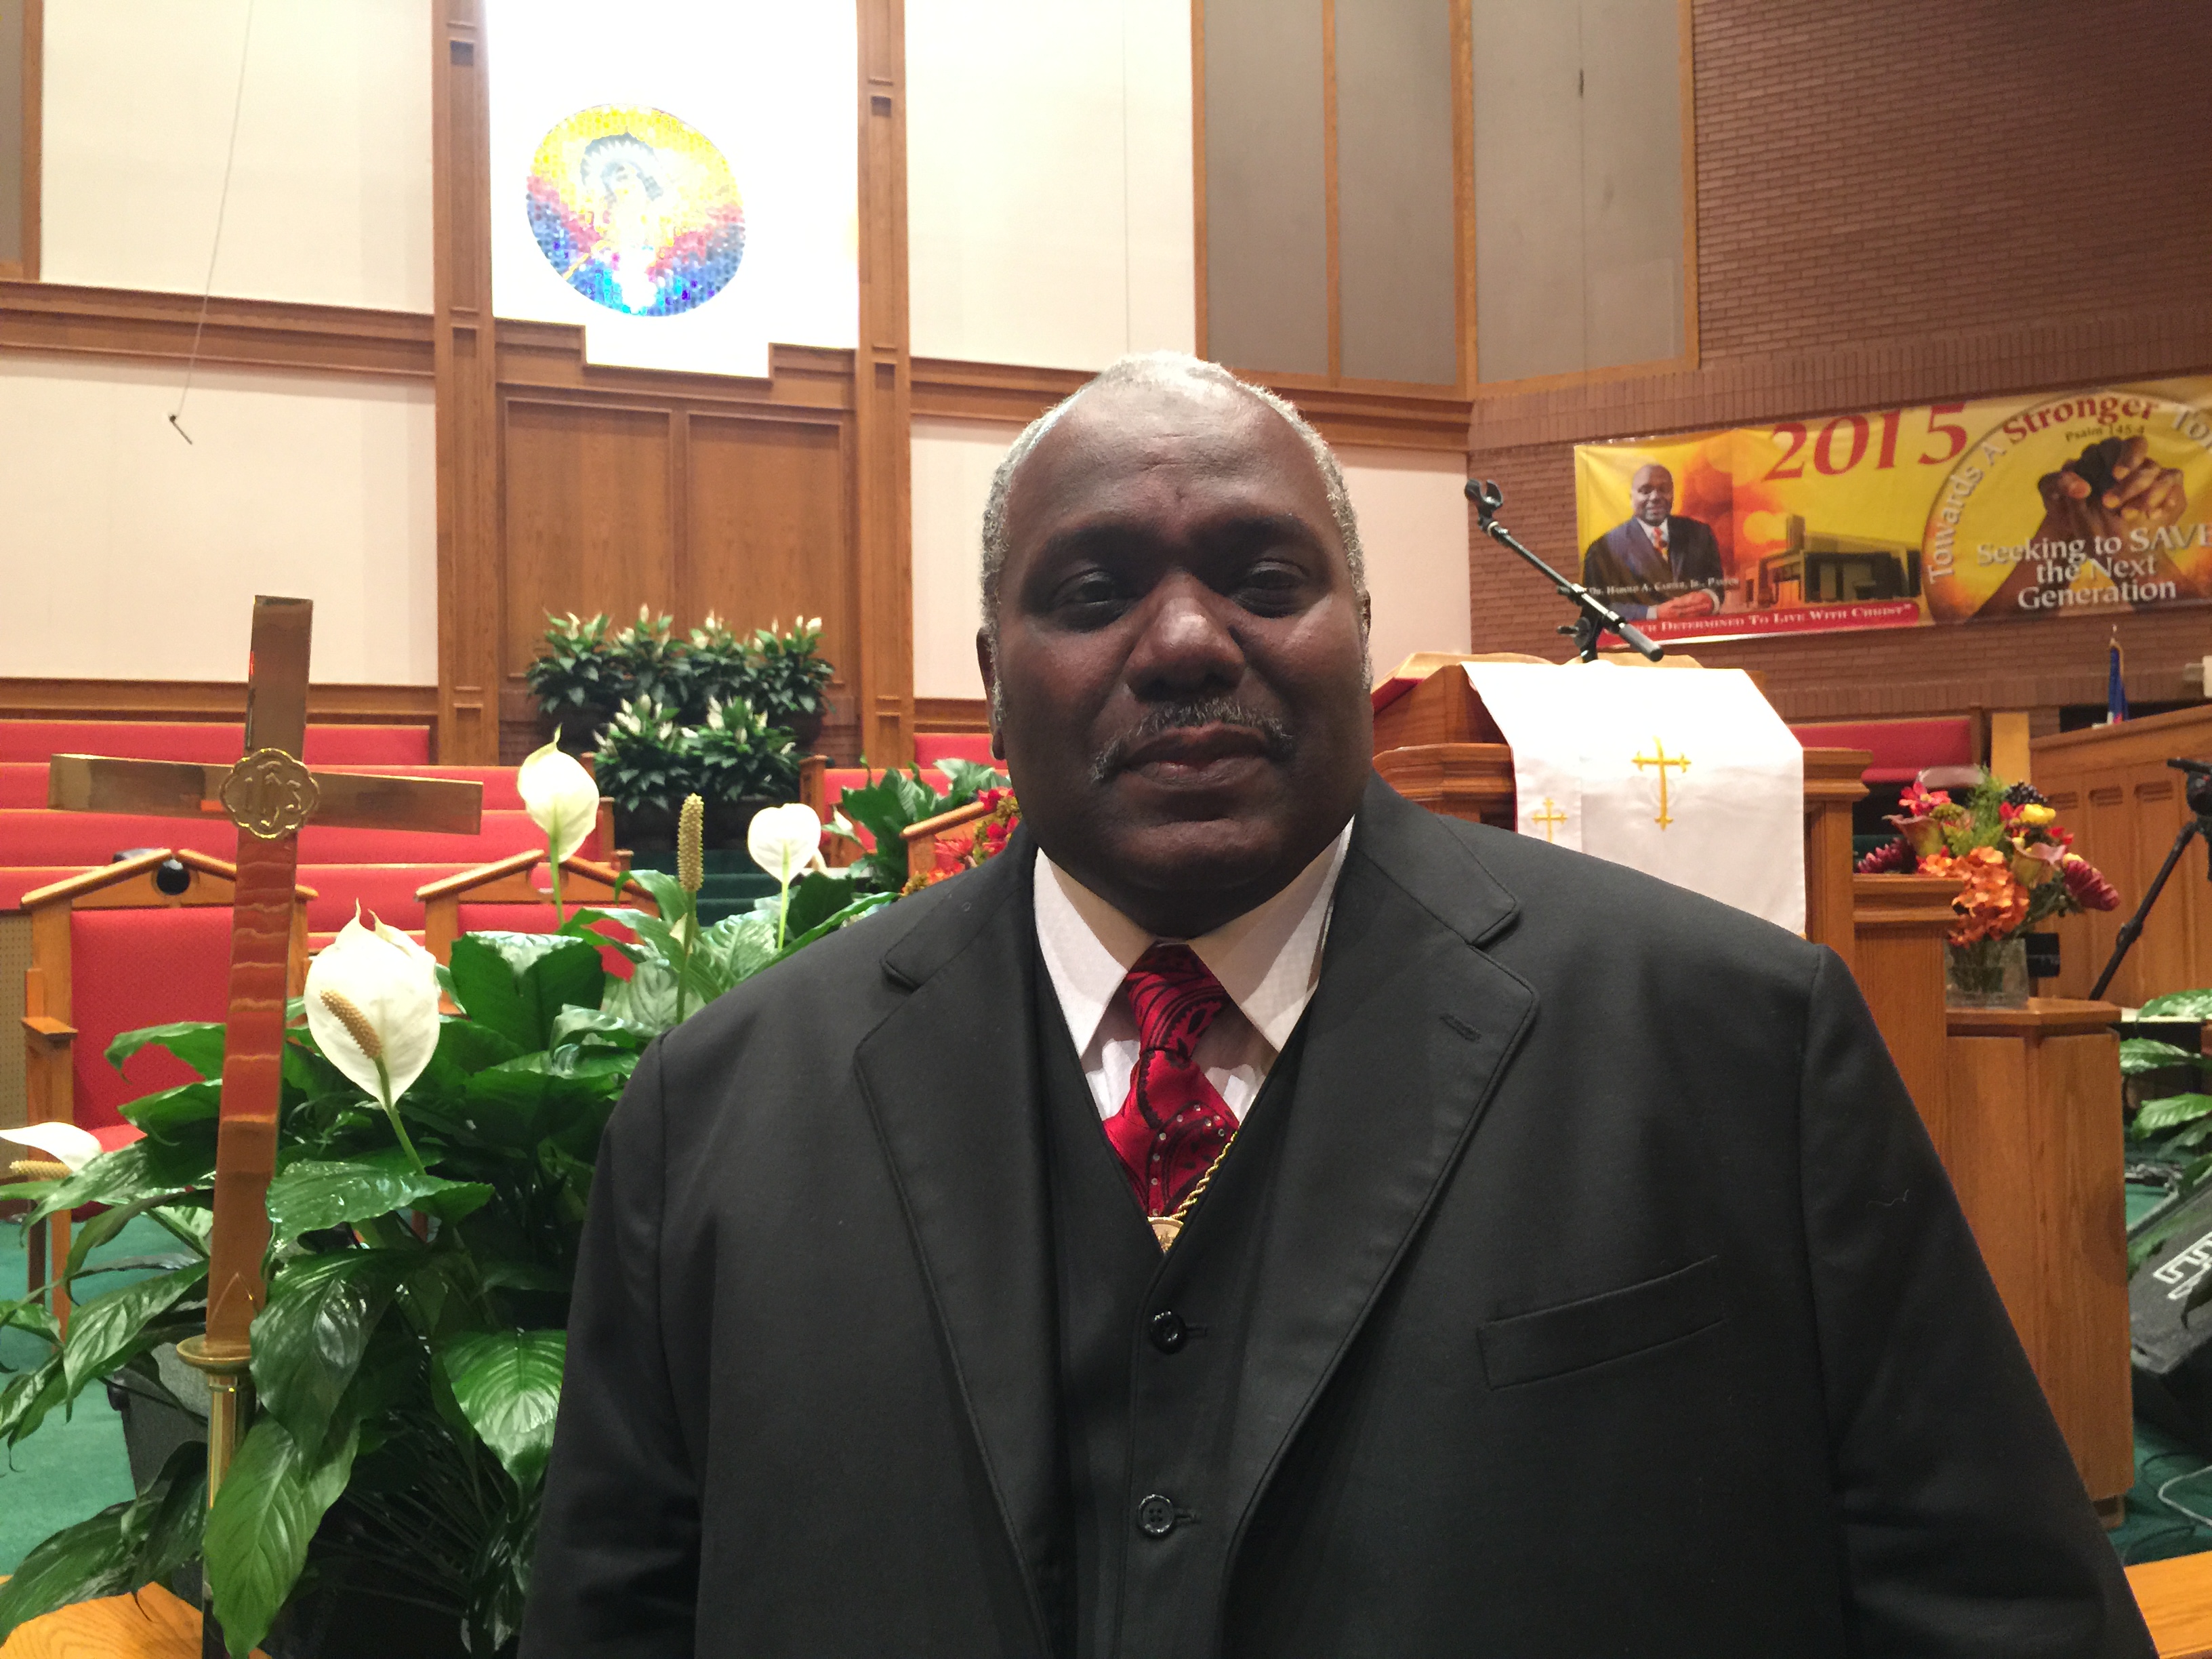 Harold Carter Jr., the pastor of New Shiloh Baptist Church in West Baltimore, called for unity, peace and revival in the wake of the death of Freddie Gray. (Photo: Josh Siegel/The Daily Signal)